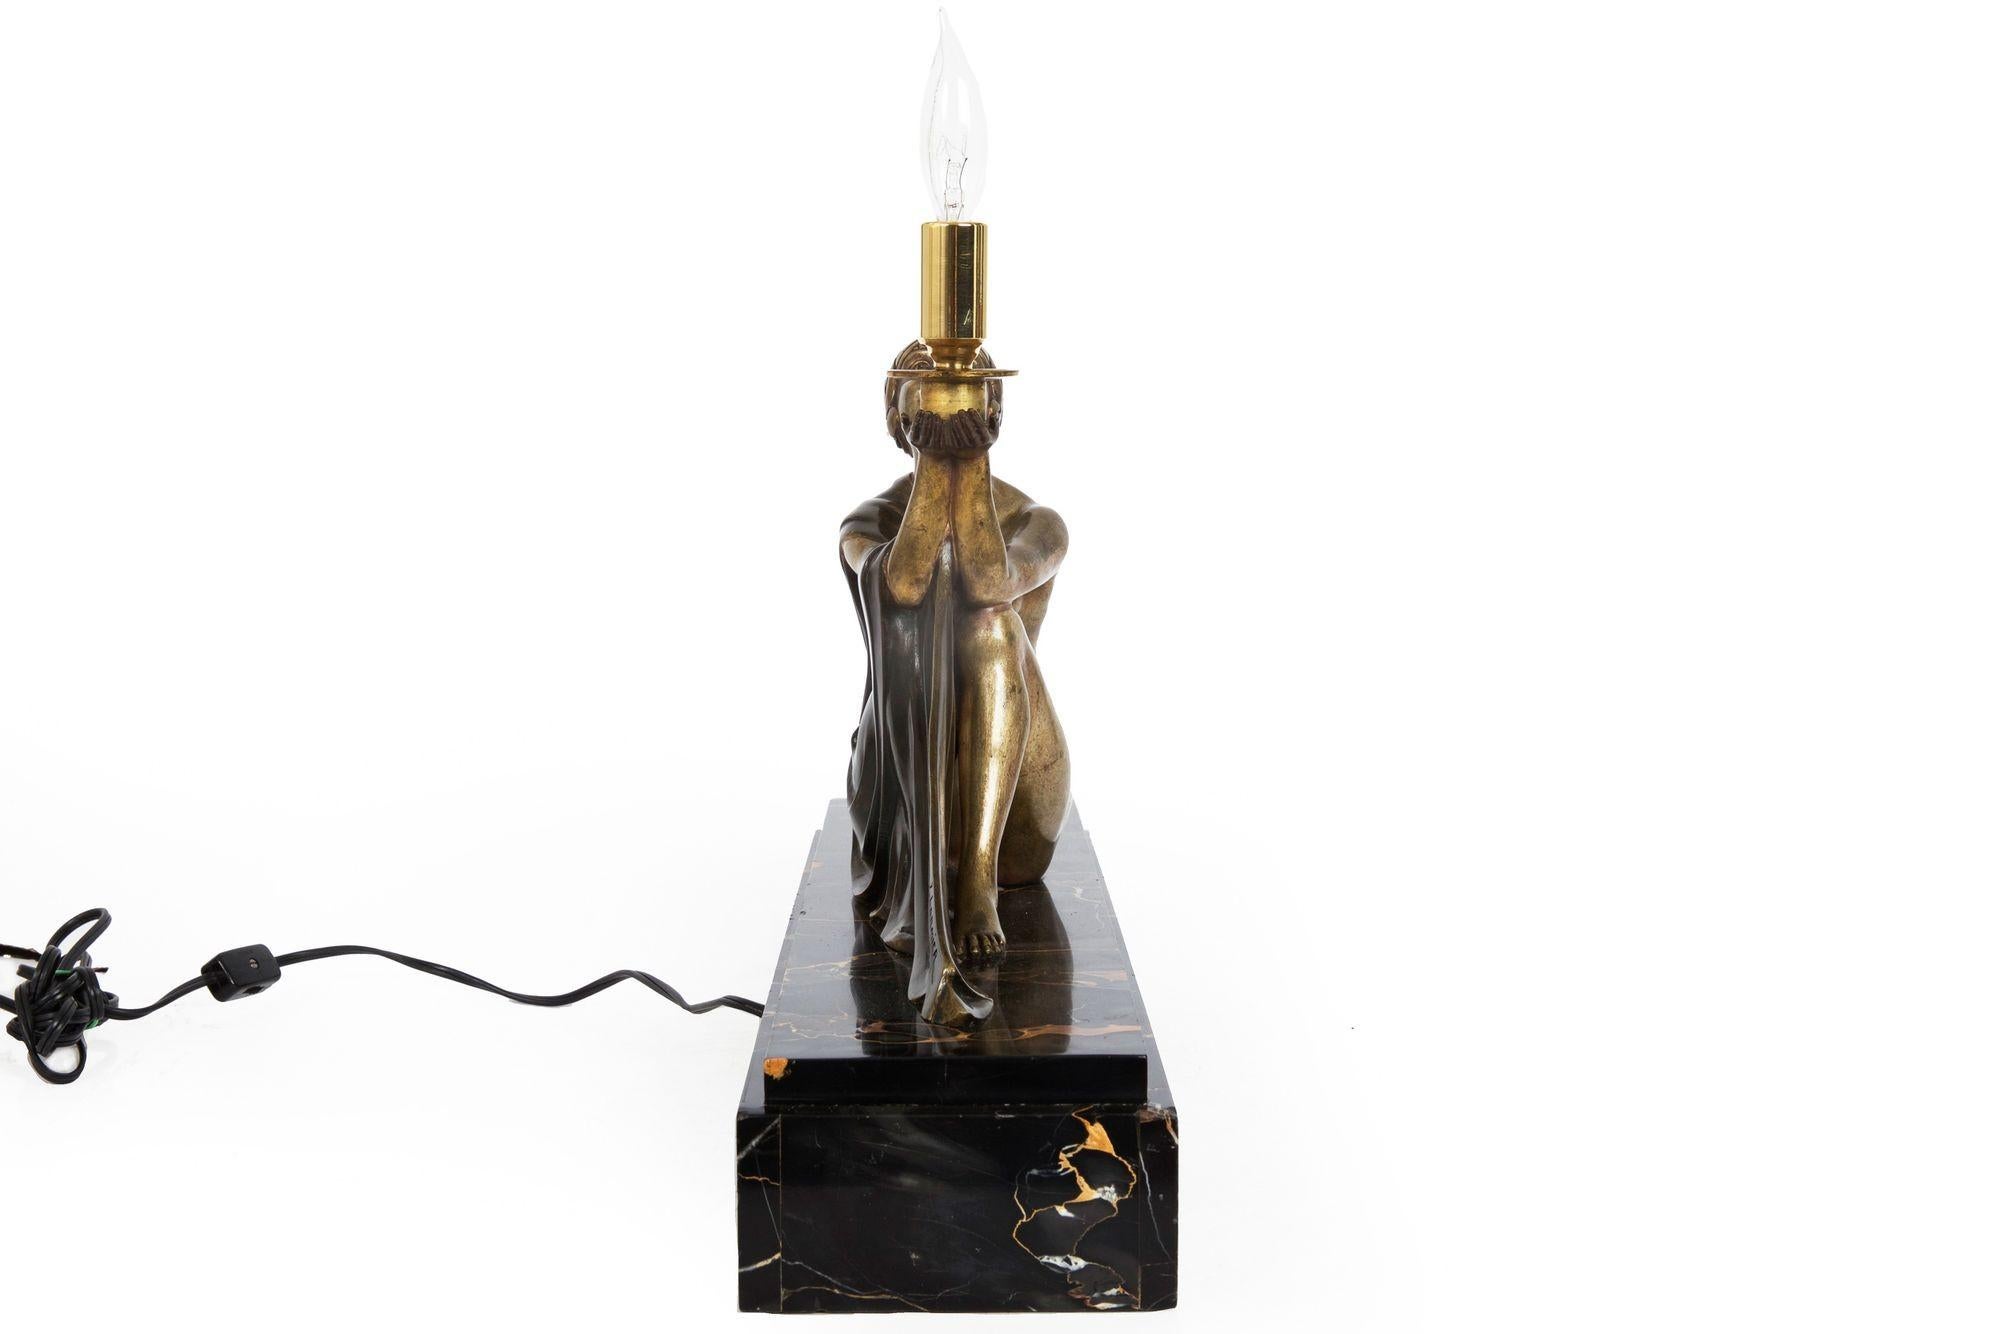 20th Century Circa 1930 Art Deco Bronze Sculpture Table Lamp by Jean Lormier For Sale